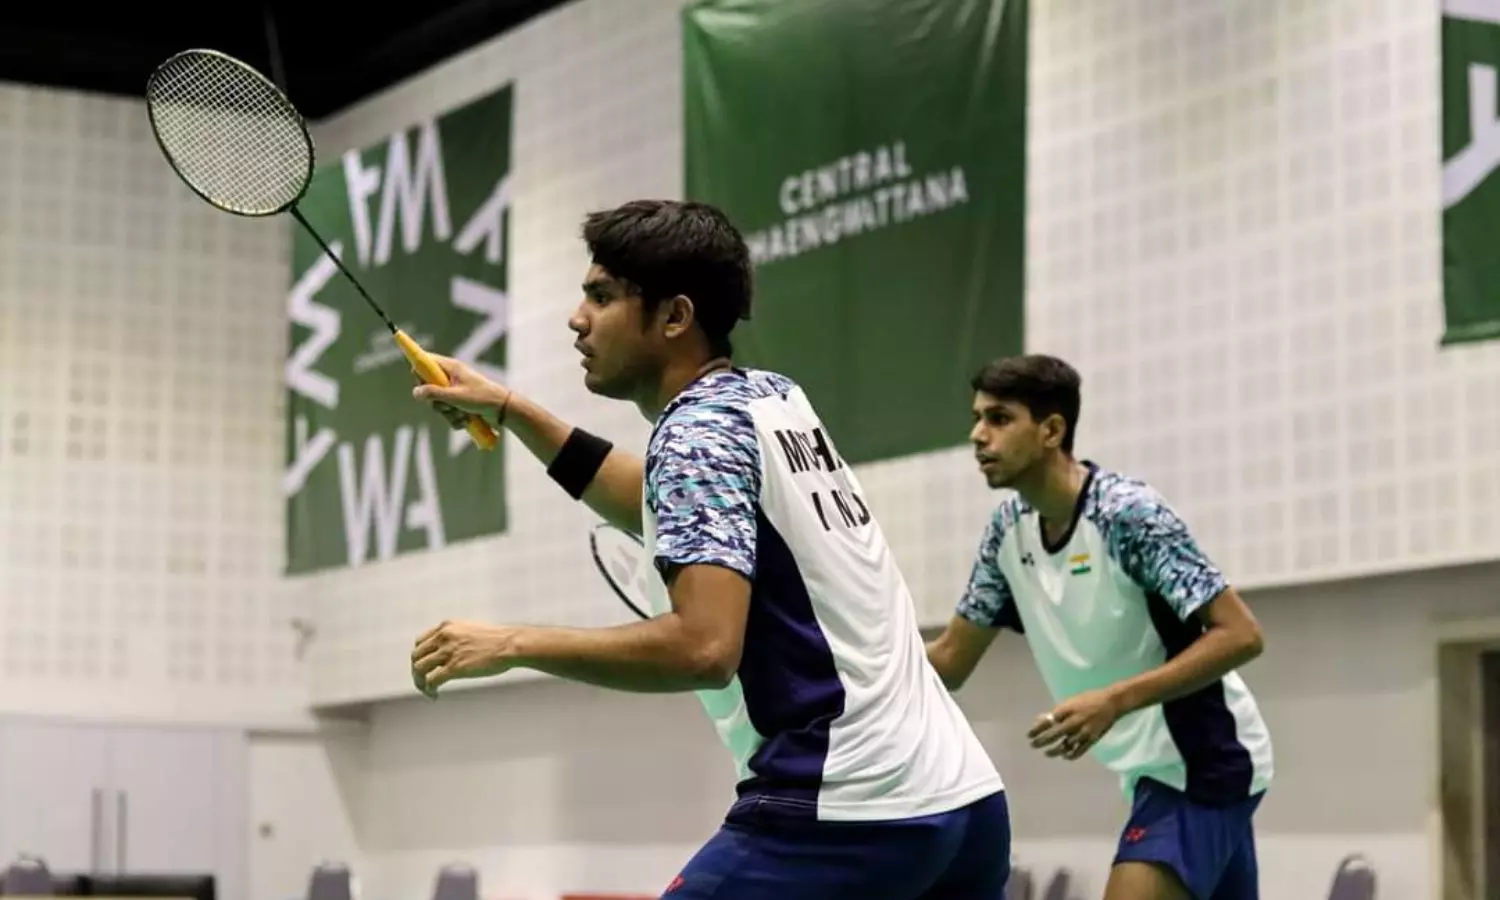 Asia Junior Badminton Cship: India ends campaign with three silver medals